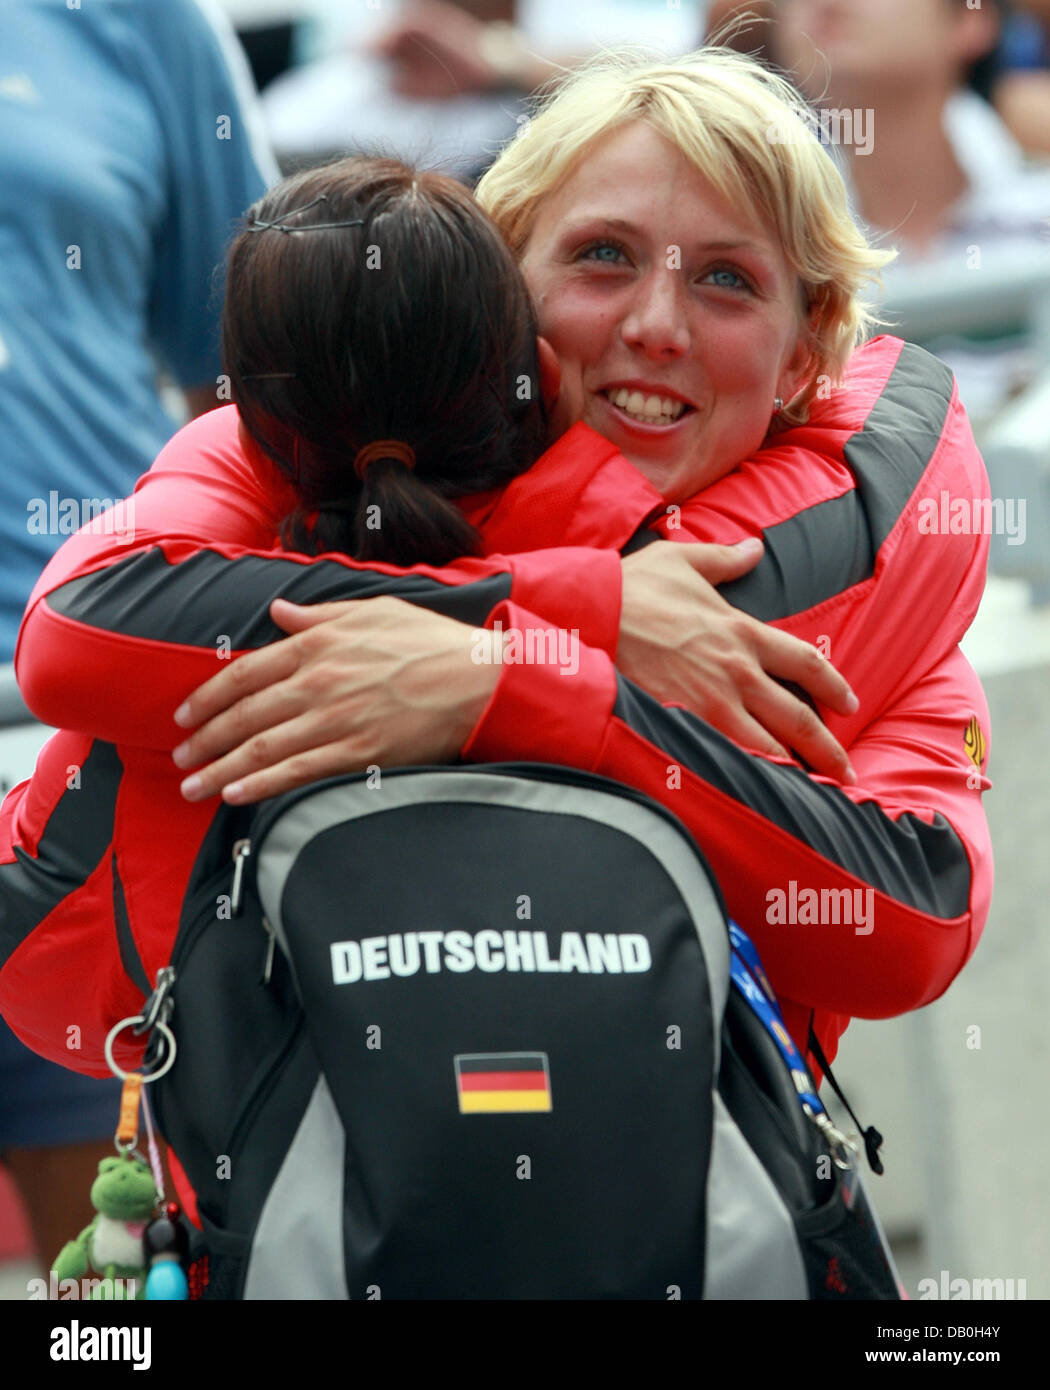 German athletes Christina Obergfoell (R) and Linda Stahl hug after they qualified for the javelin throw final at the IAAF World Championships 2007 in Osaka, Japan, 29 August 2007. Photo: Gero Breloer Stock Photo